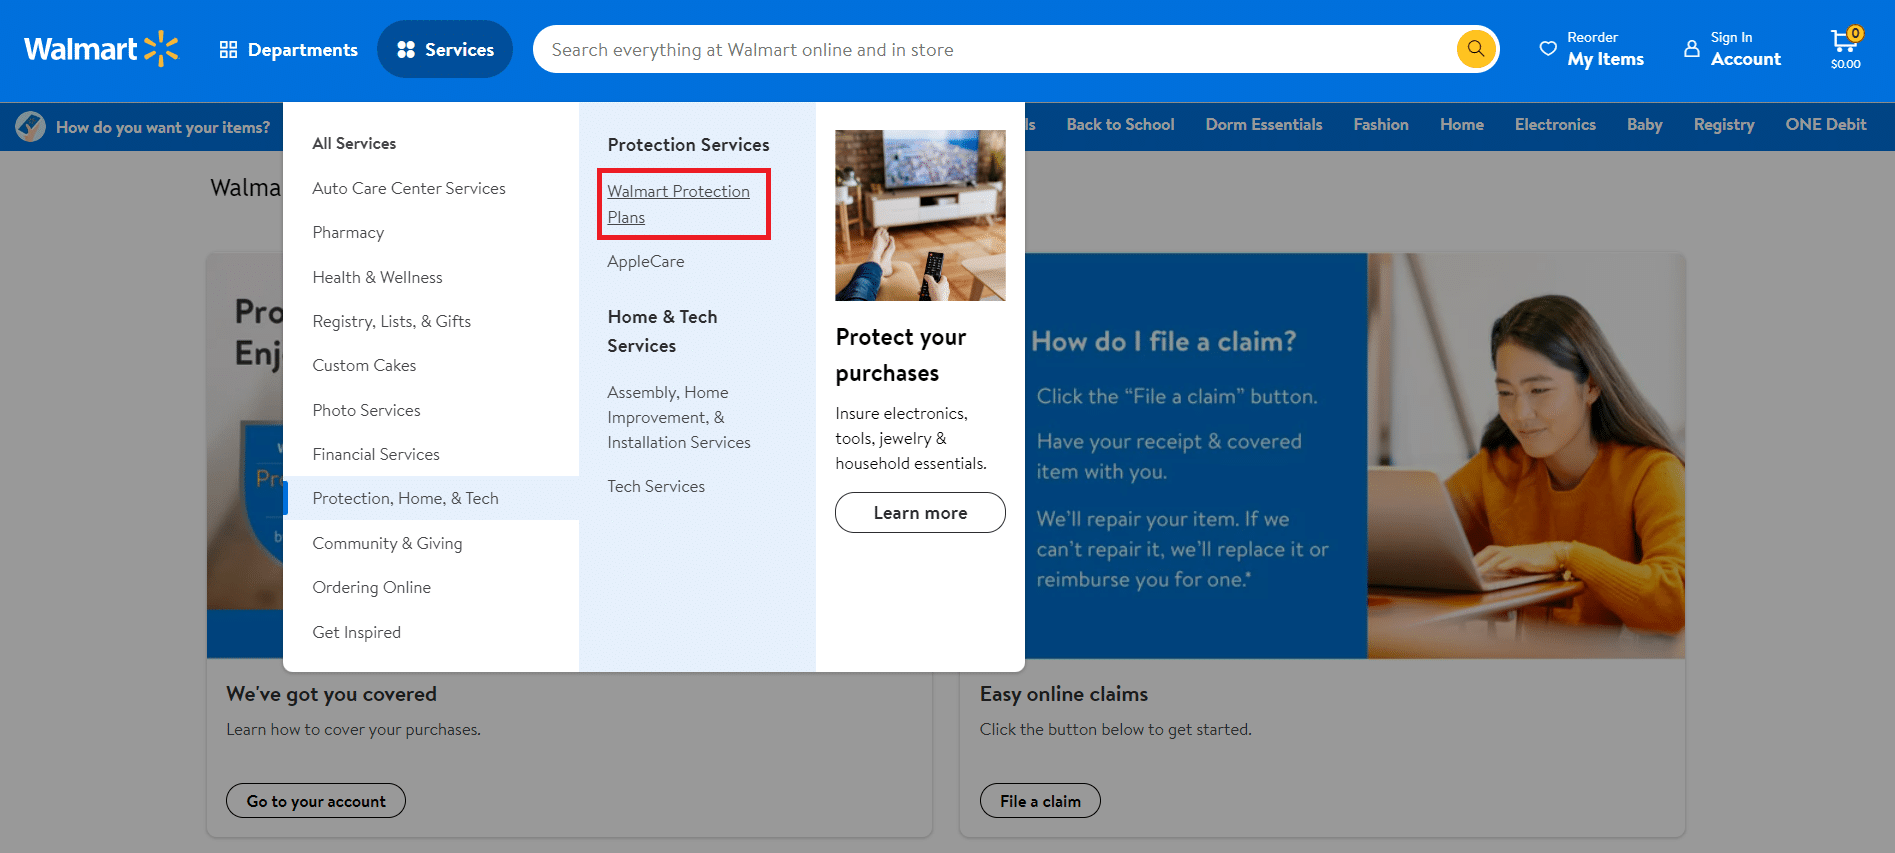 Services tab at Walmart's website